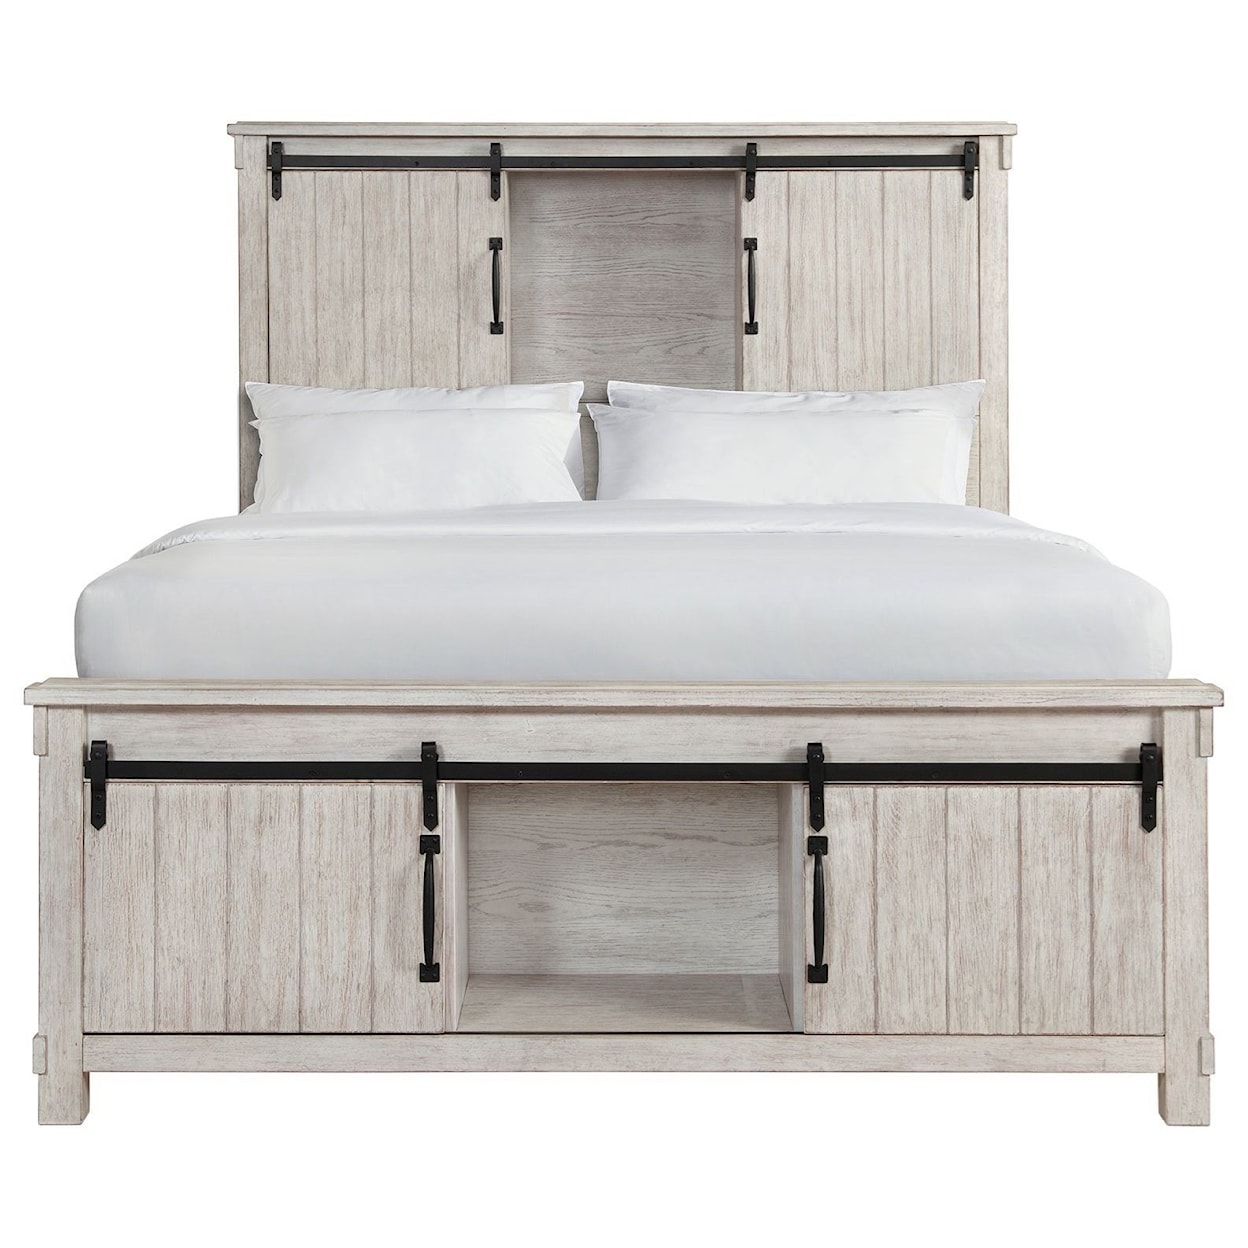 VFM Basics Fulton Queen Bed with Storage